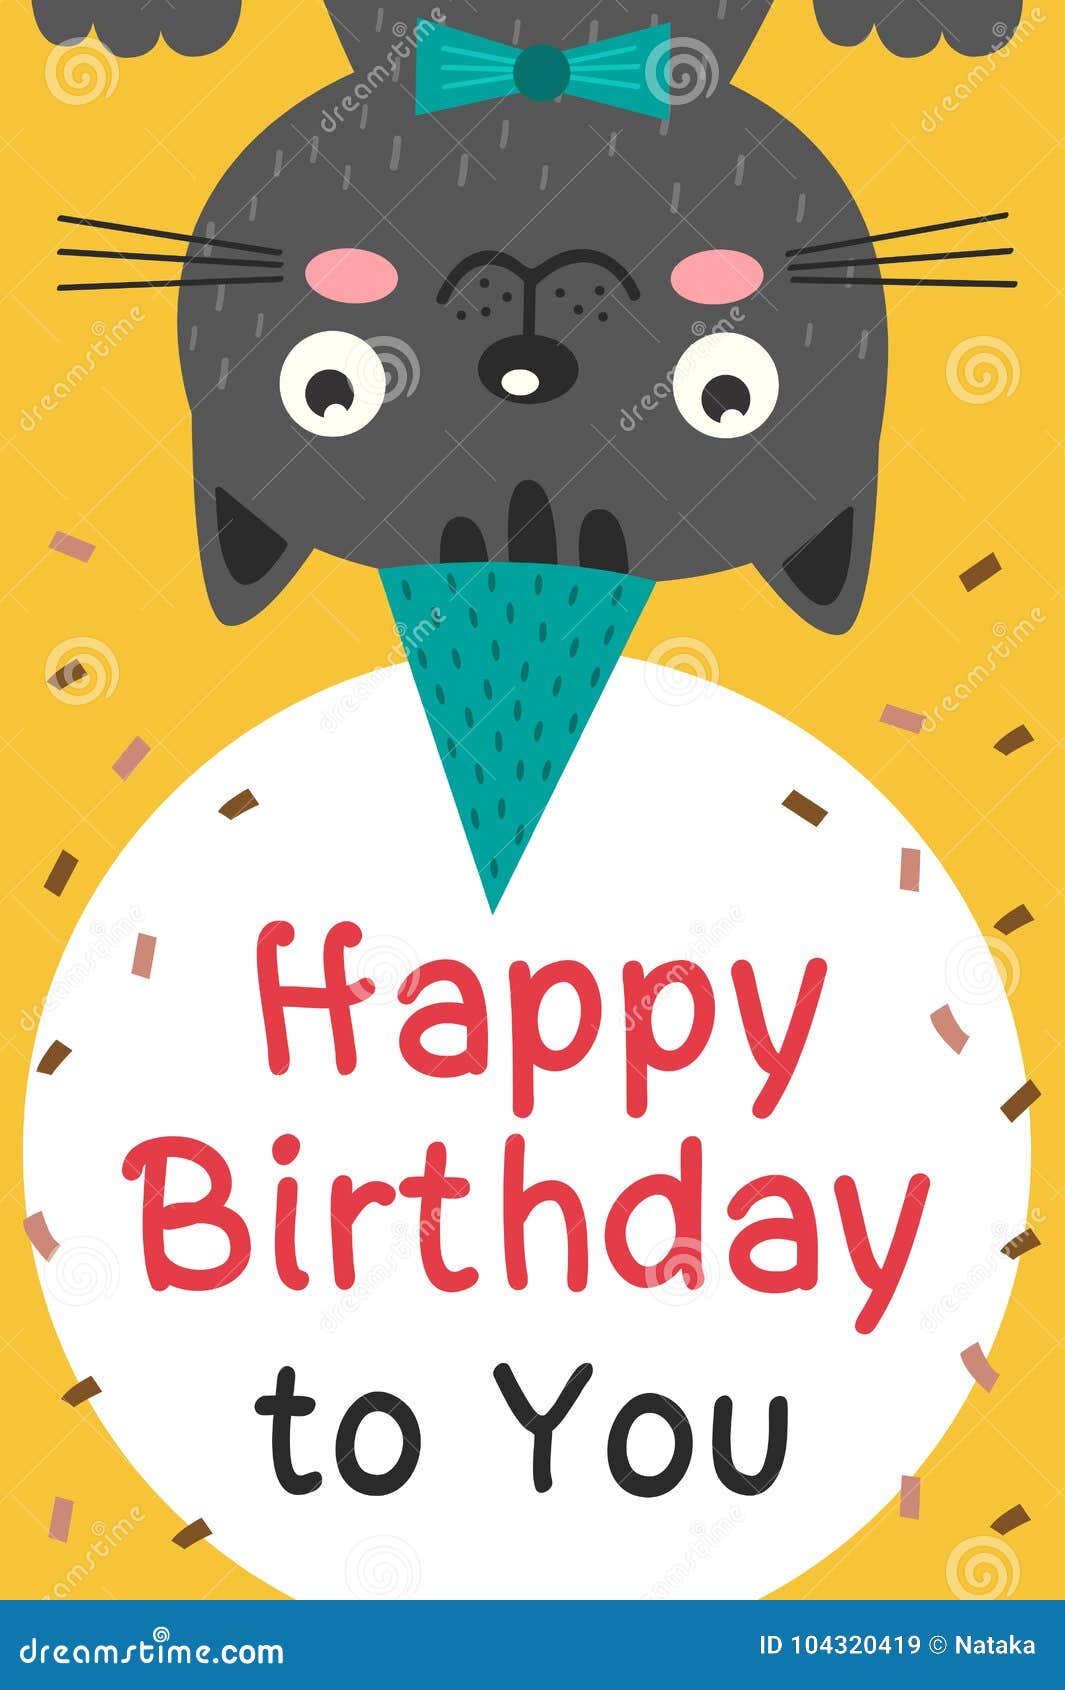 Happy Birthday Card With Black Cat Stock Vector Illustration Of